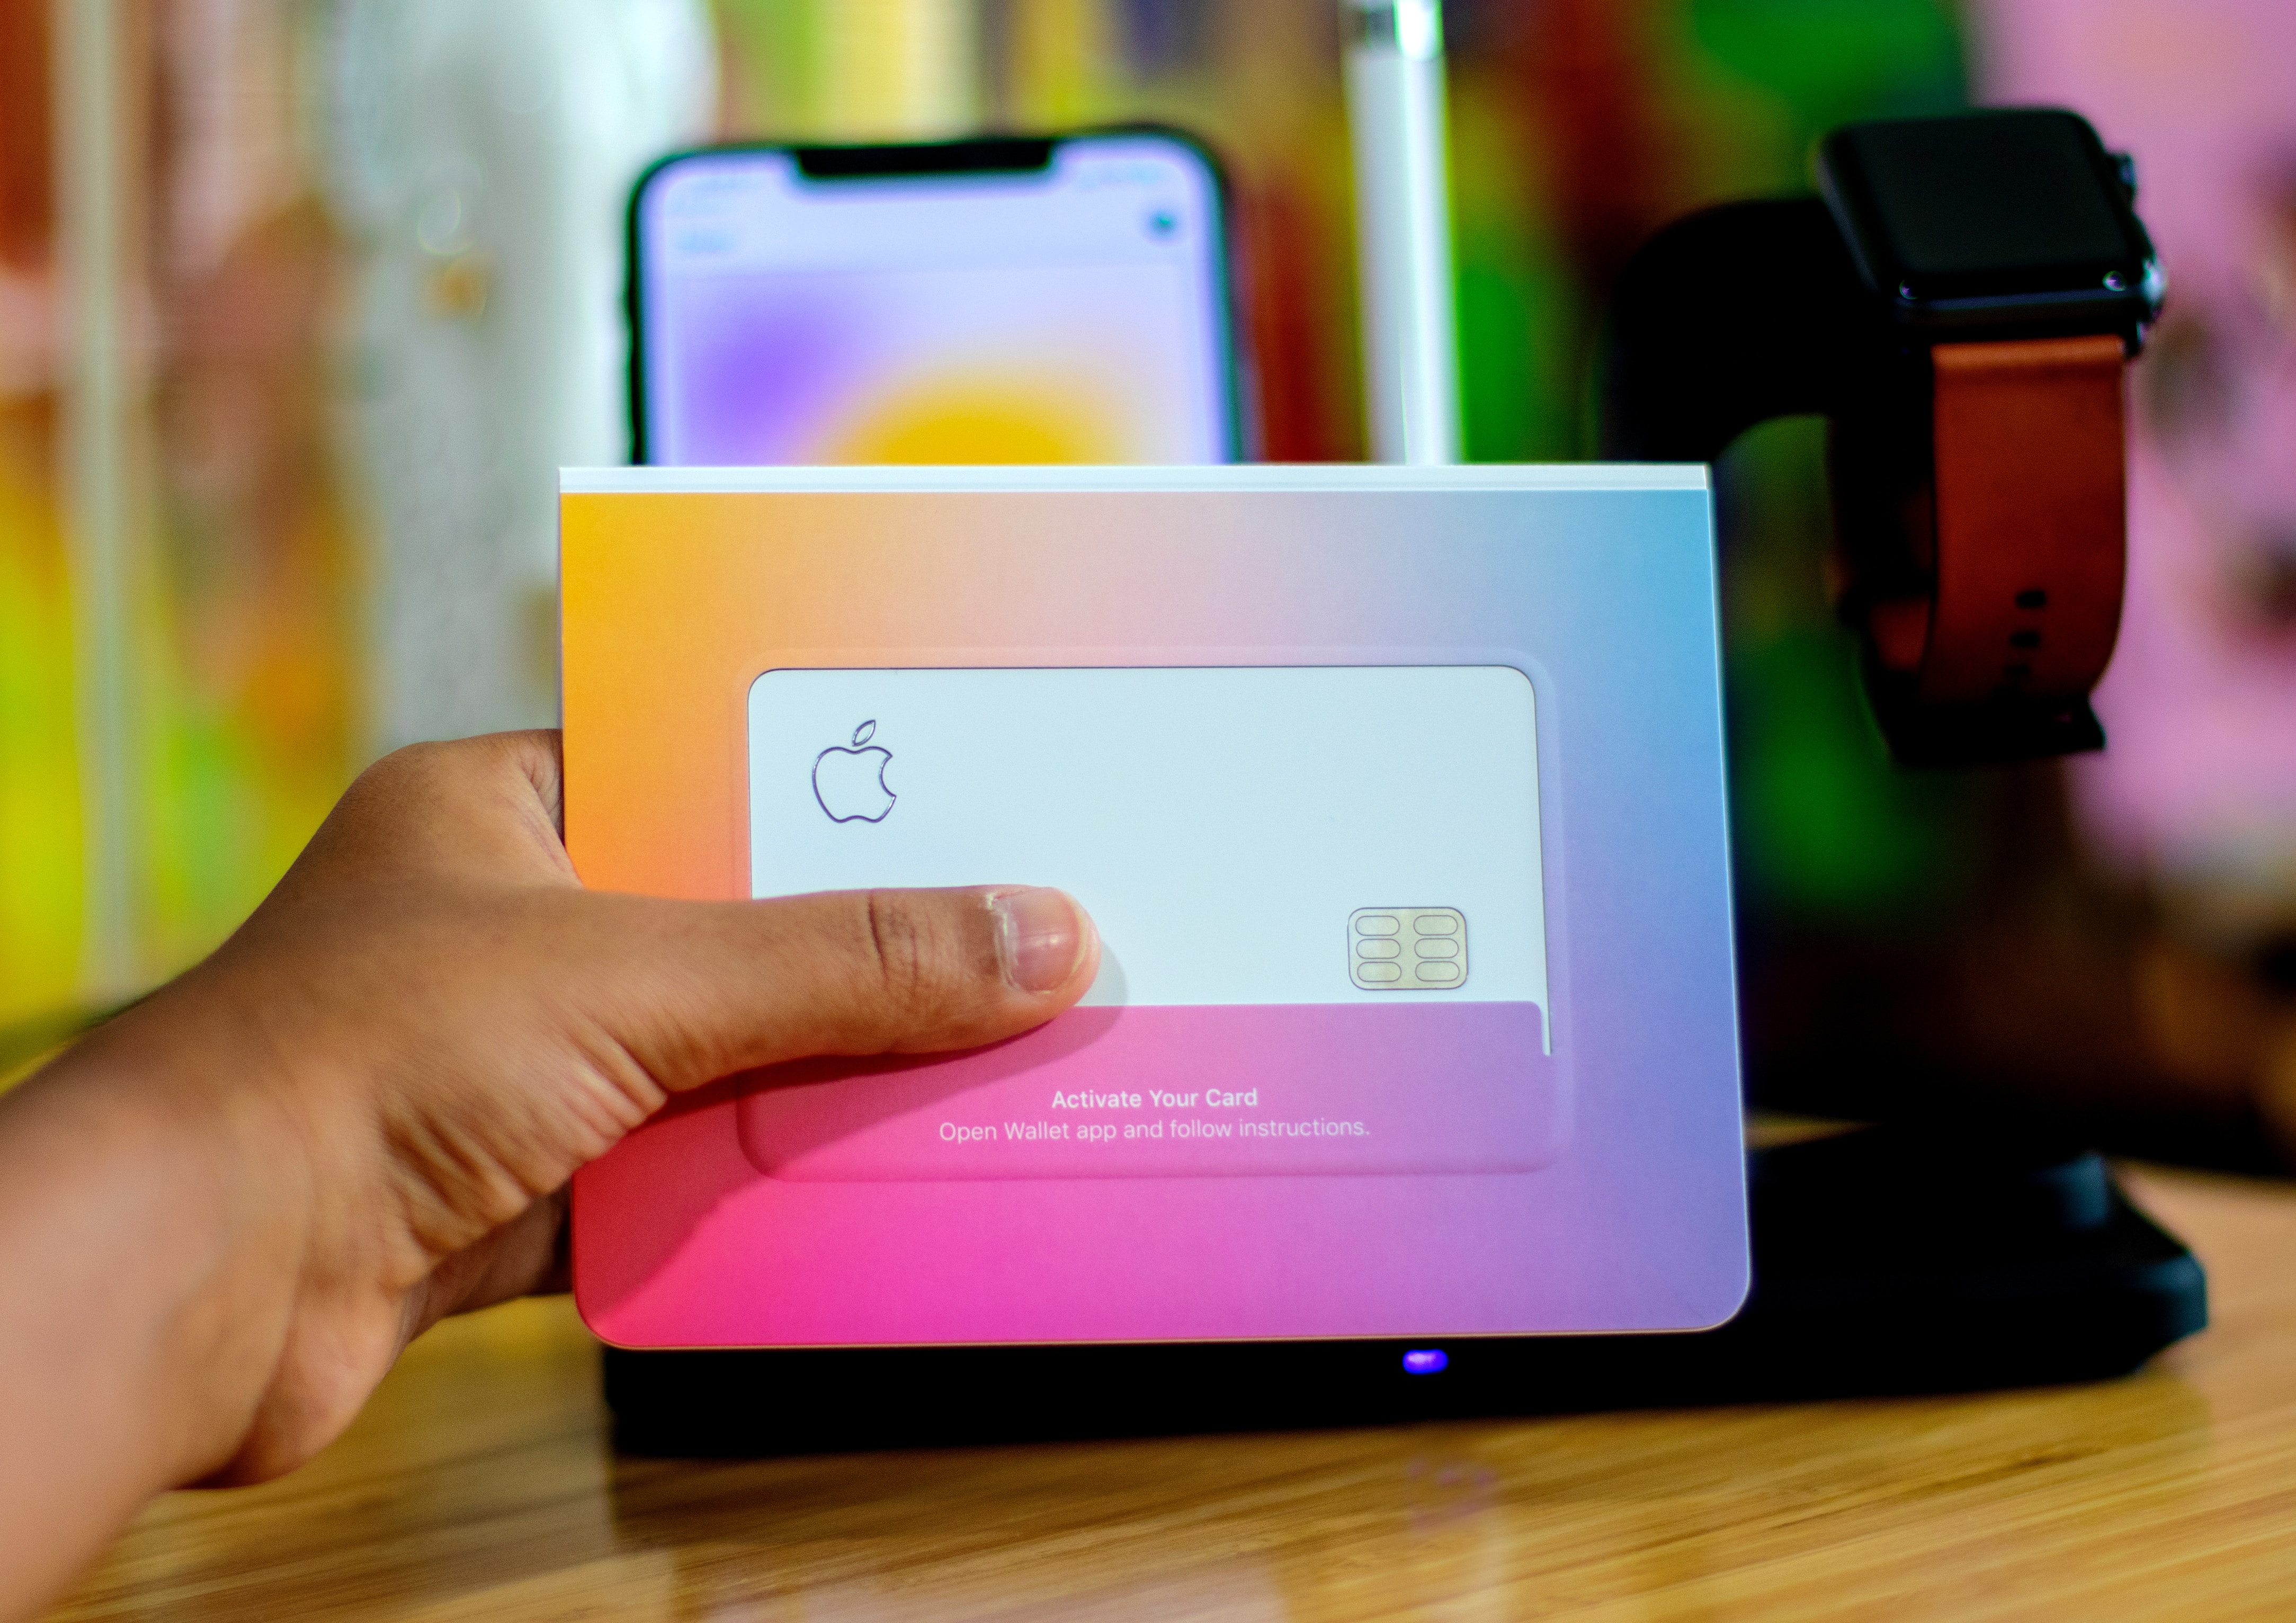 Banks vs Apple Card. Who delivers the better UX?